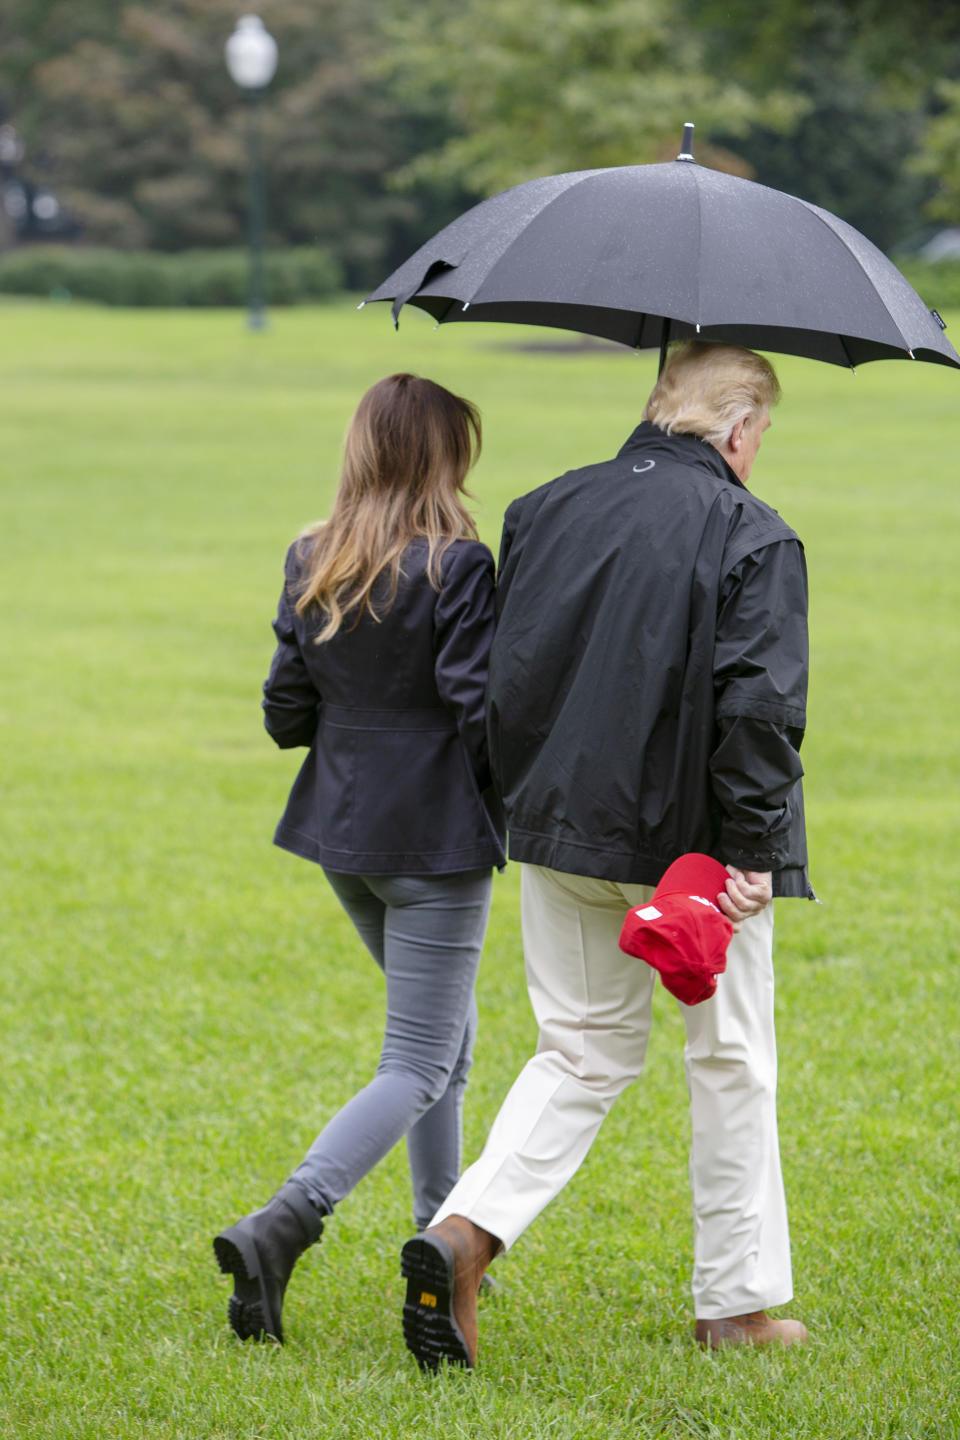 The President continued to only cover himself with the umbrella as the pair walked towards their awaiting helicopter. Source: Getty